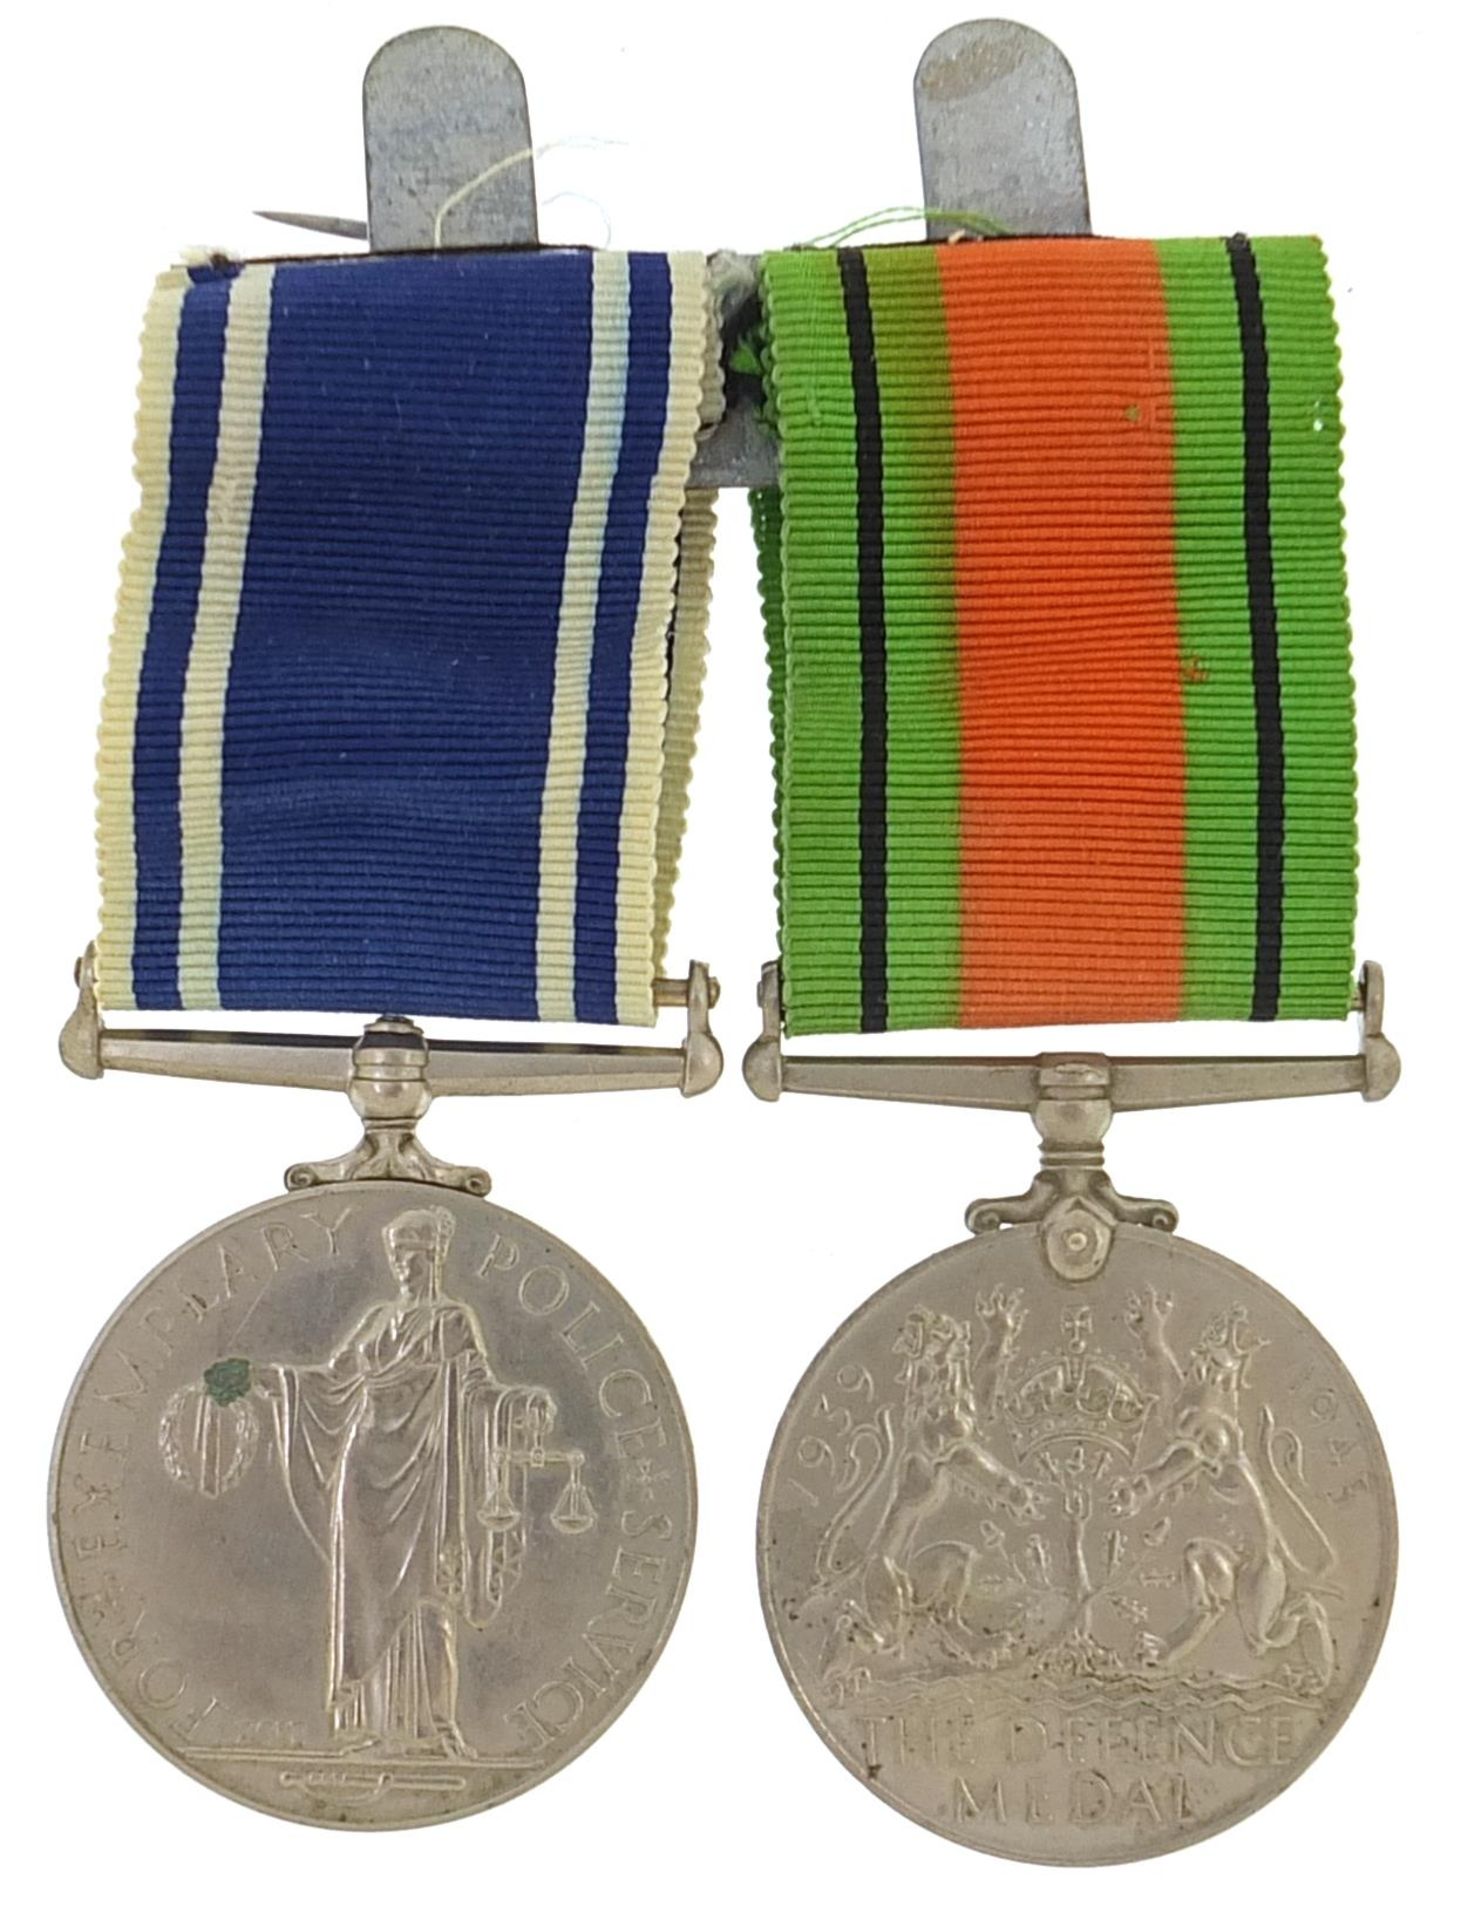 British military World War II Police two medal group including Exemplary Police Service medal - Image 2 of 4